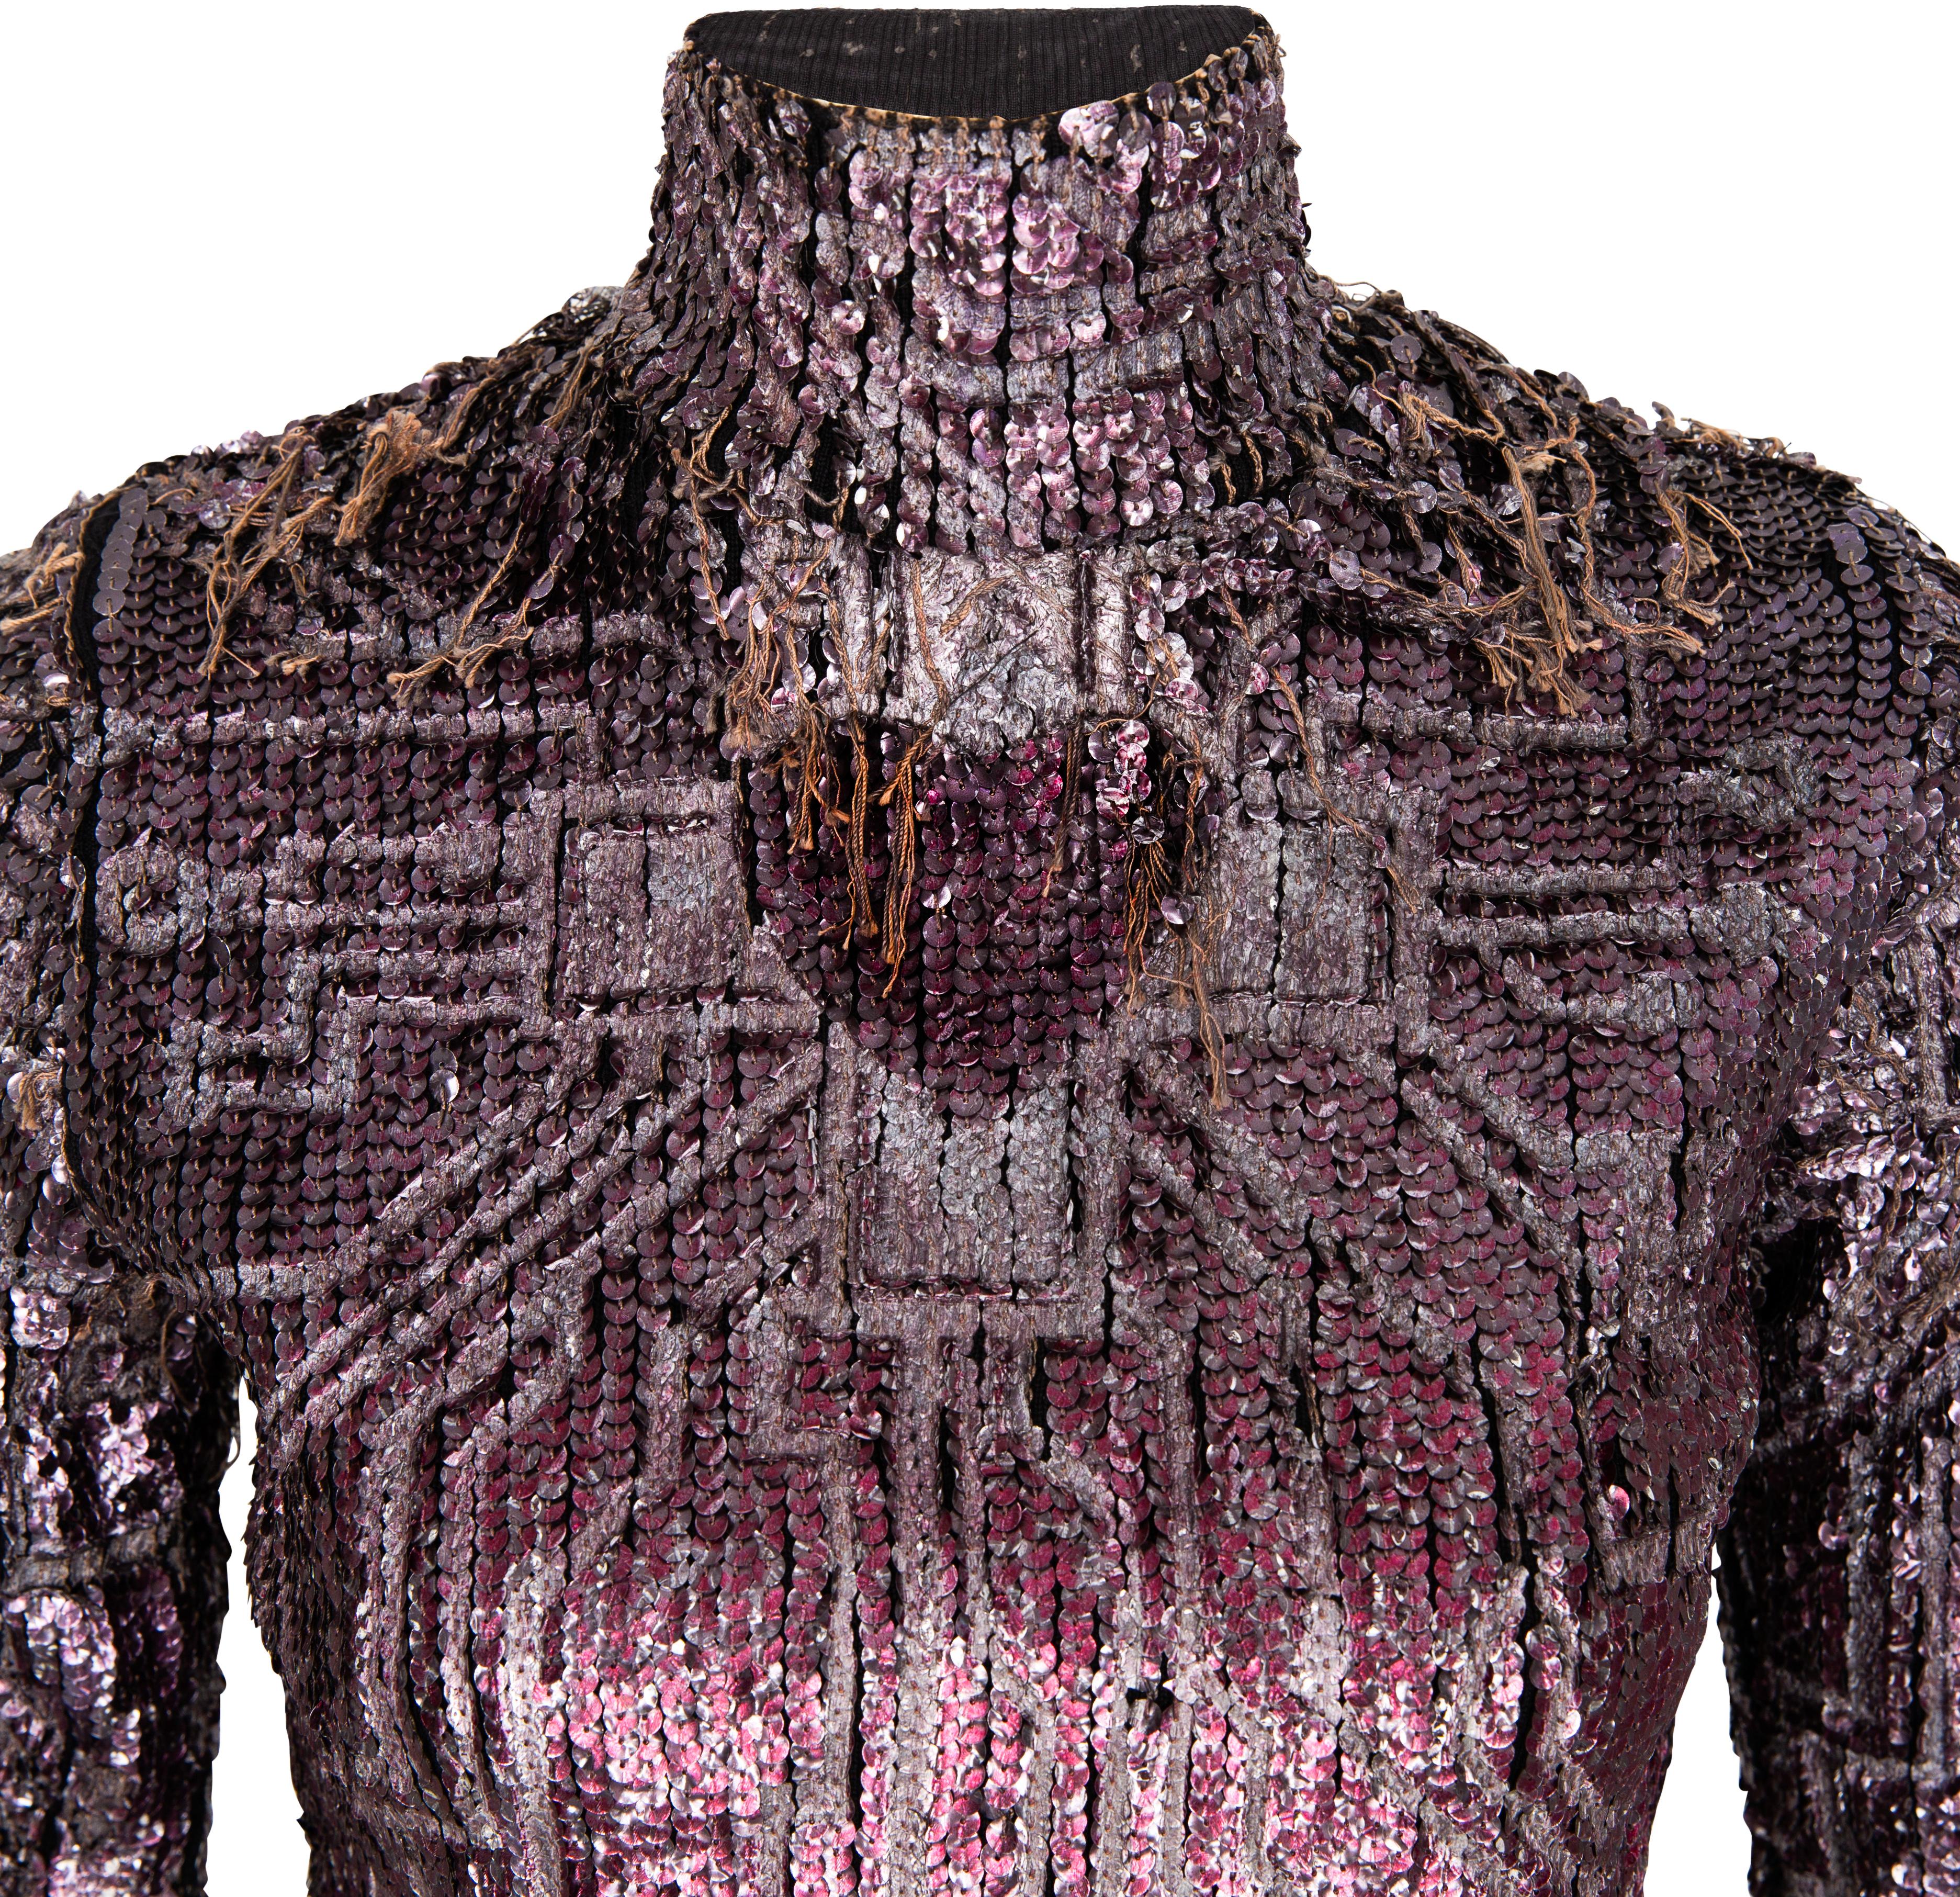 Sequined embellished top adorned with a heart graphic, fringed sequins, and back zipper closure from Jean Paul Gaultier's fall 1995 runway collection modeled by Estelle Lefébure in look eighty-nine. This unique piece is from Jean Paul Gaultier's